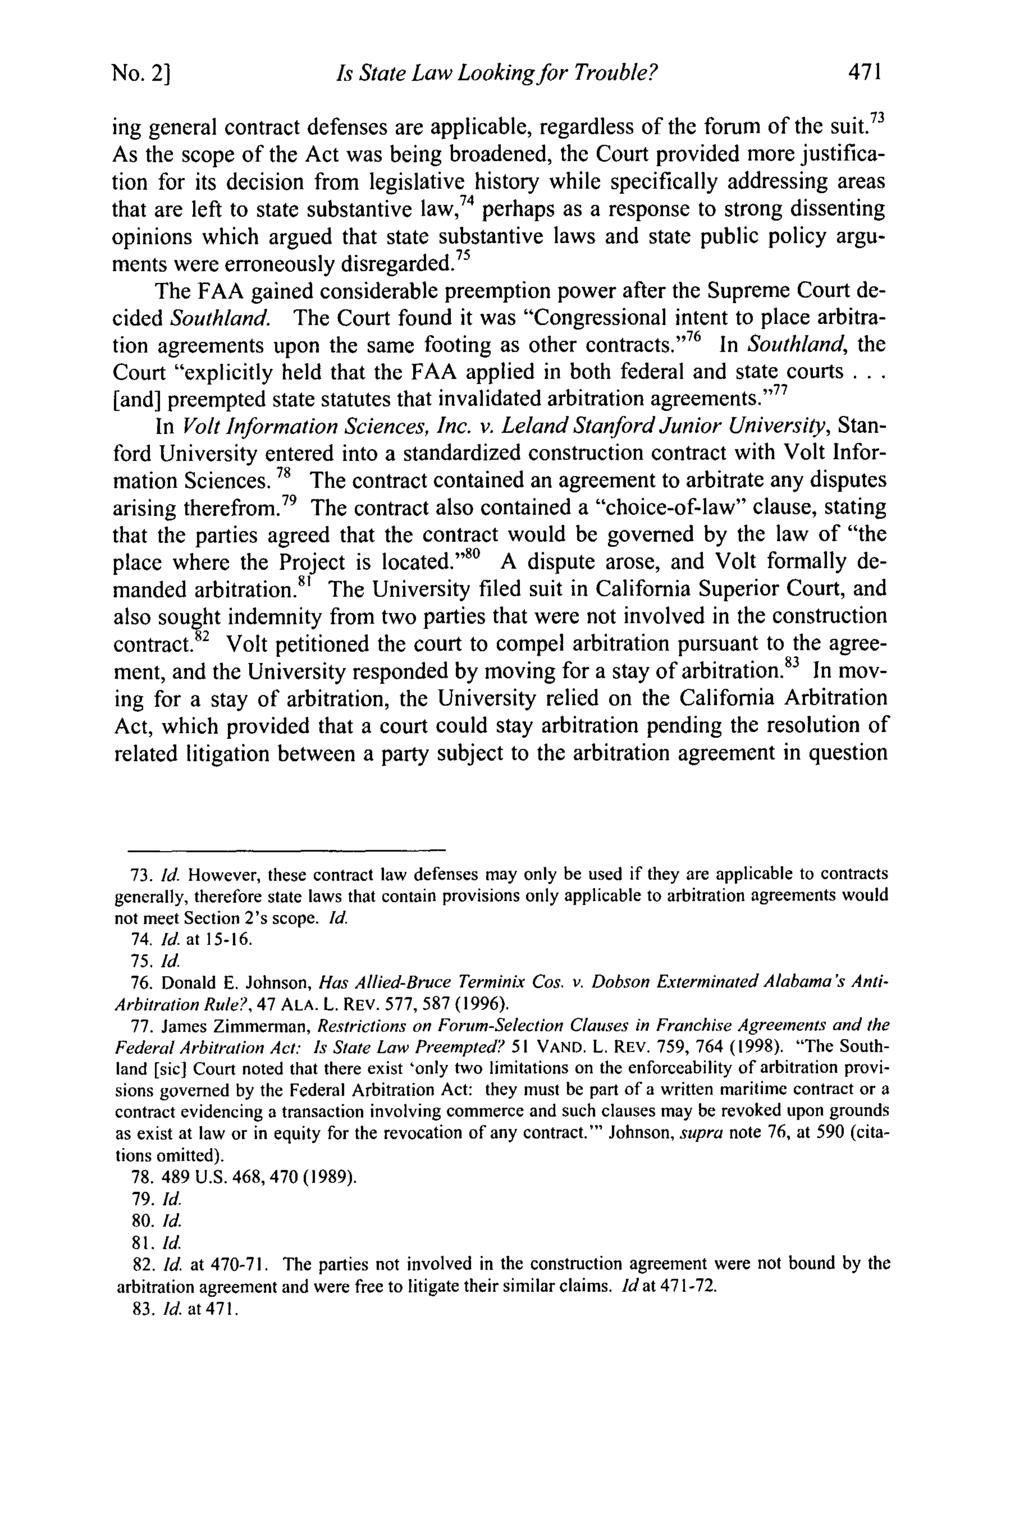 No. 2] Hollis et al.: Hollis: Is State Law Looking for Trouble Is State Law Looking for Trouble? ing general contract defenses are applicable, regardless of the forum of the suit.